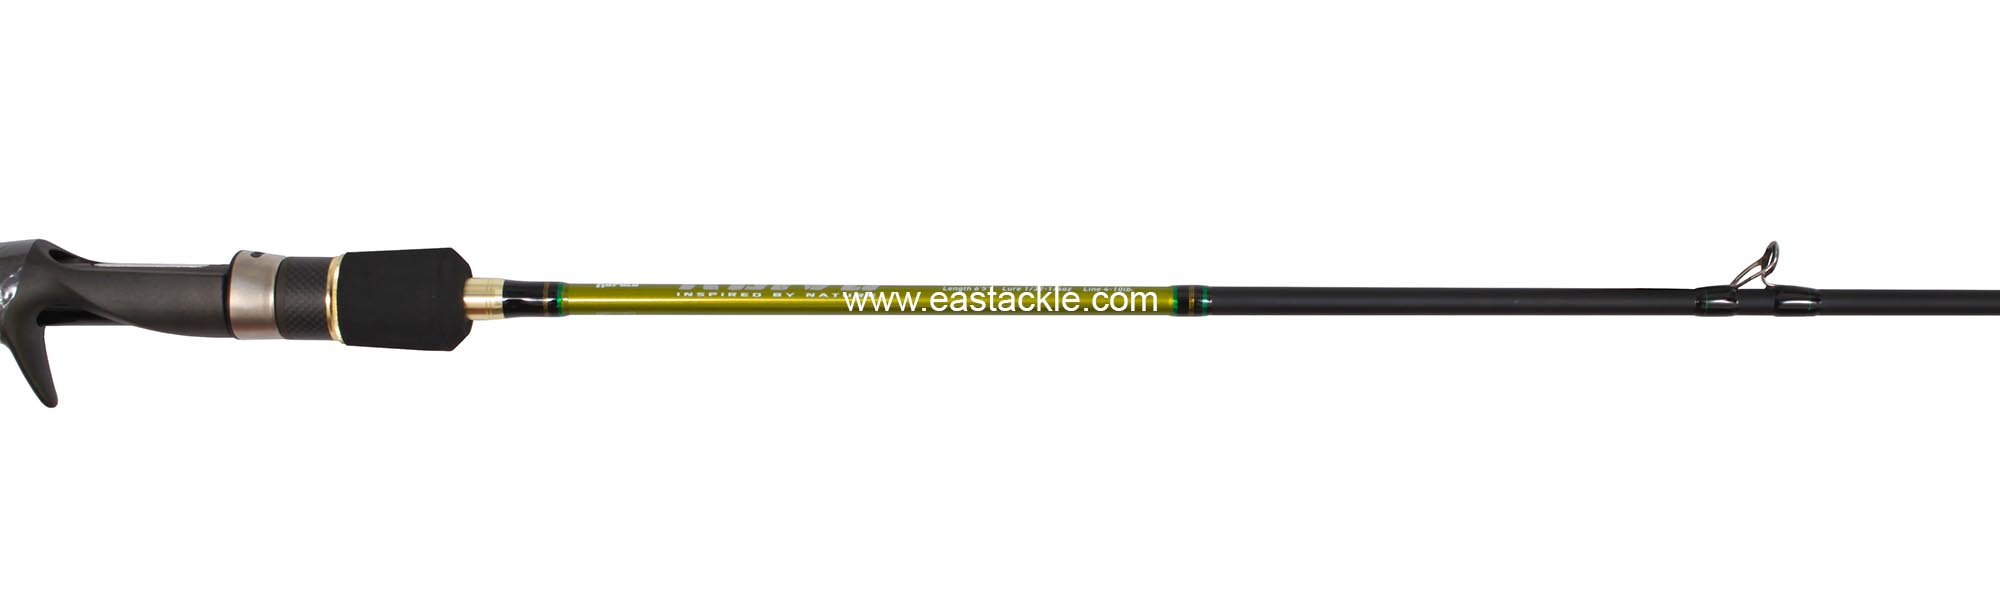 Rapala - Koivu - KVC651M - Bait Casting Rod - Reel Seat Fore Grip to Stripper Guide (Side View) | Eastackle